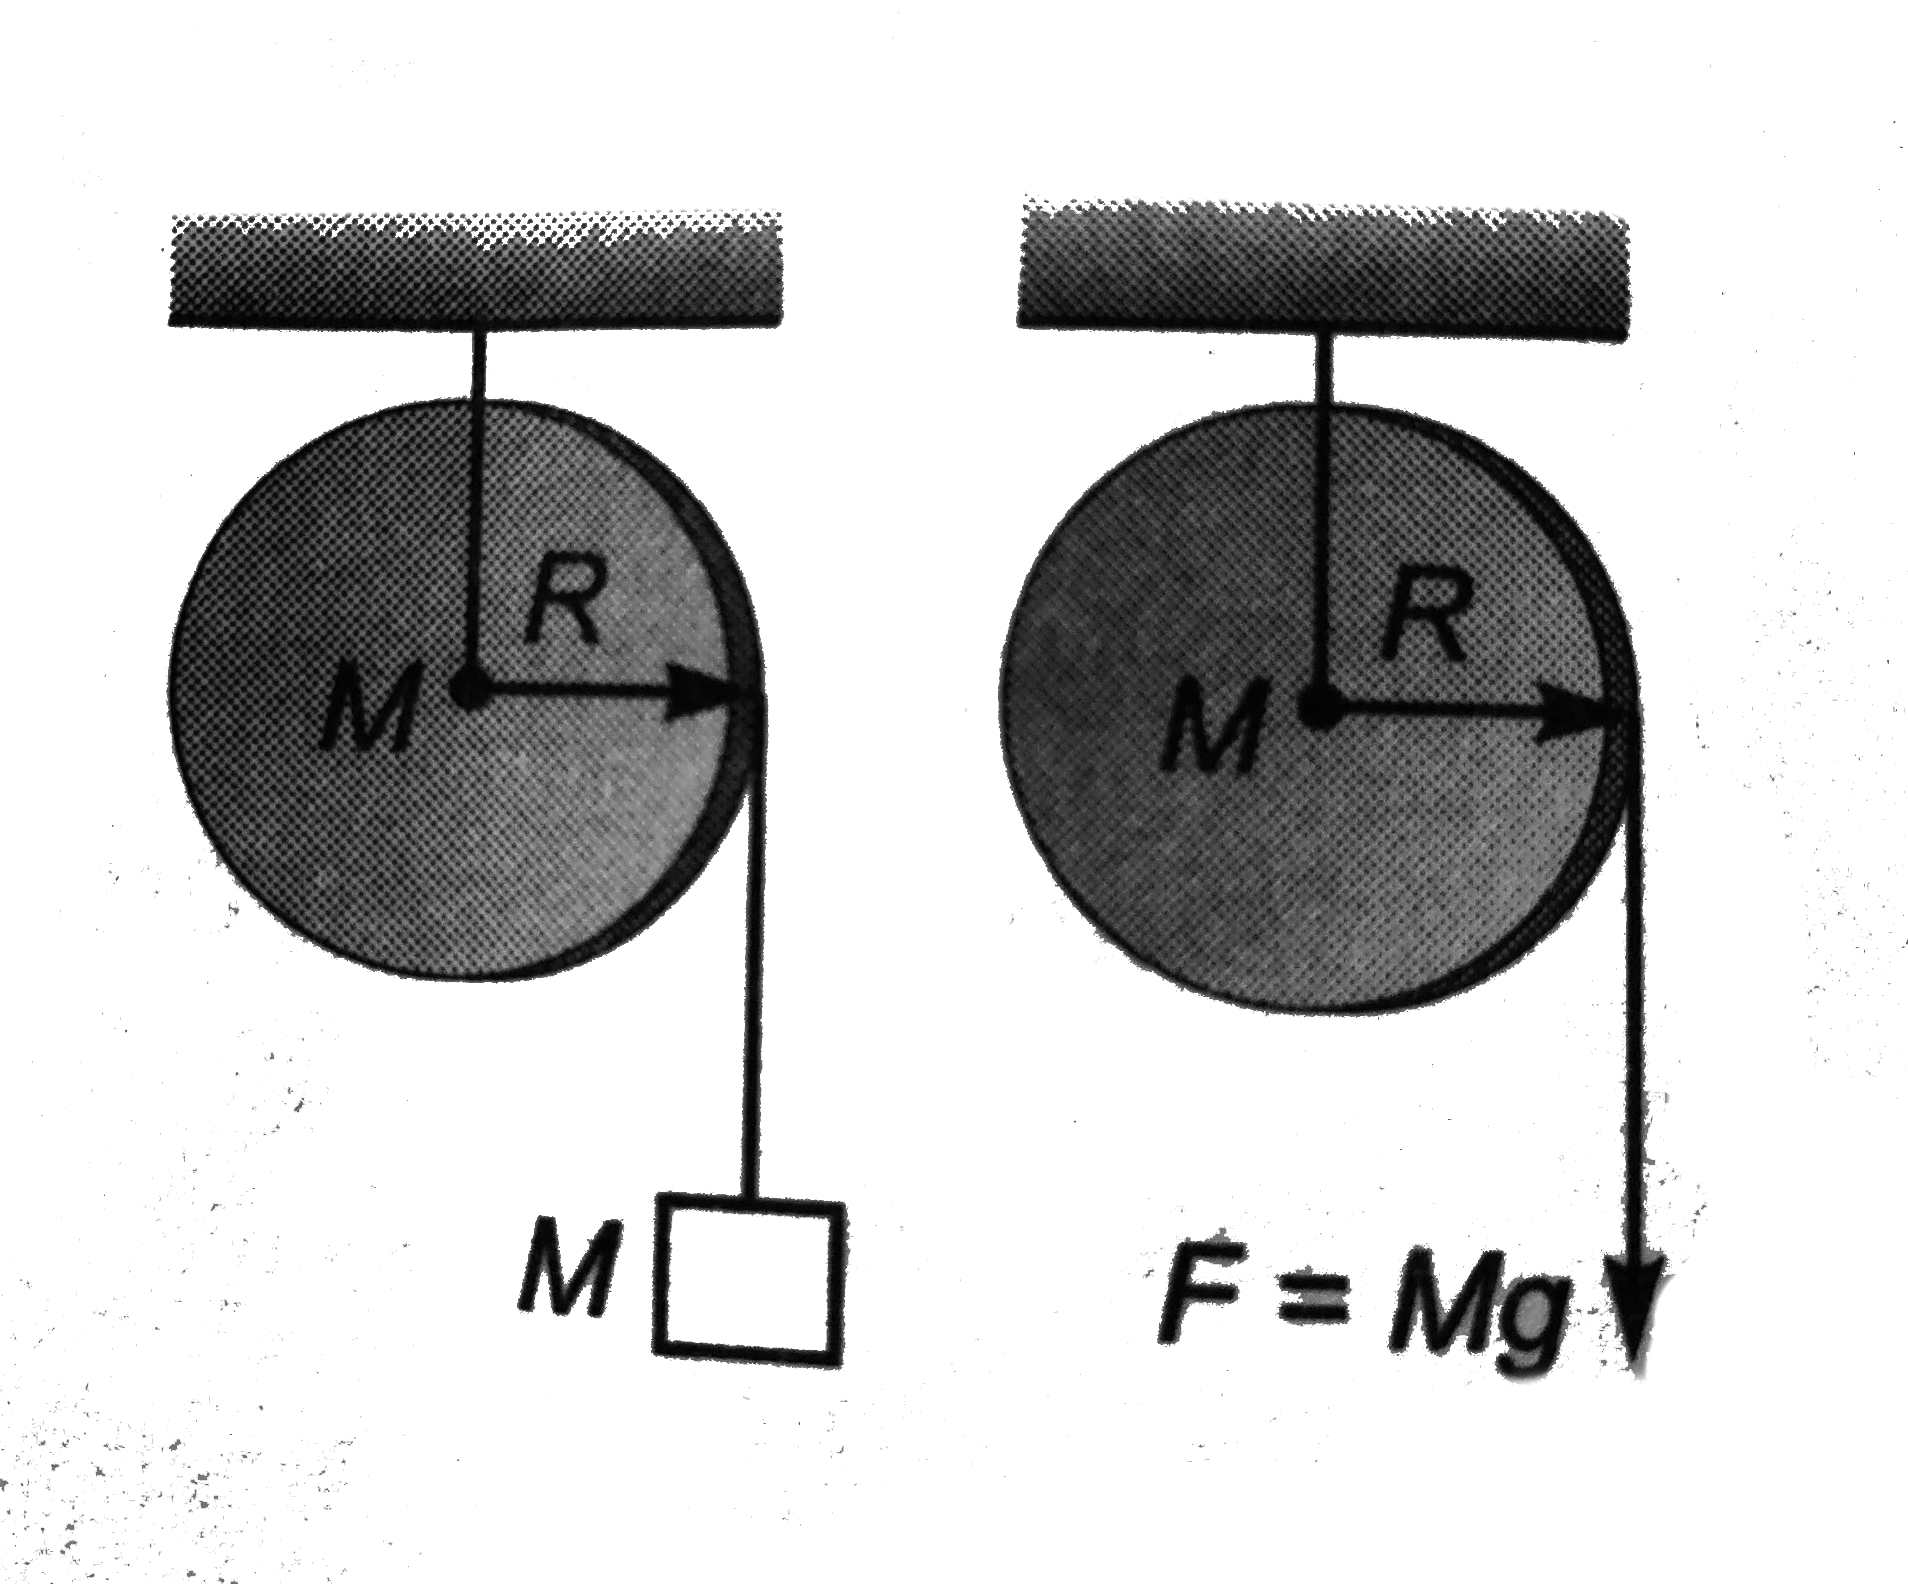 The figure represent two cases. In first case a block of mass M is attached to a string which is tightly wound on a disc of mass M and radius R. In second case F=Mg initially the disc is stationary in each case. if the same length of string is unwound from the disc, then